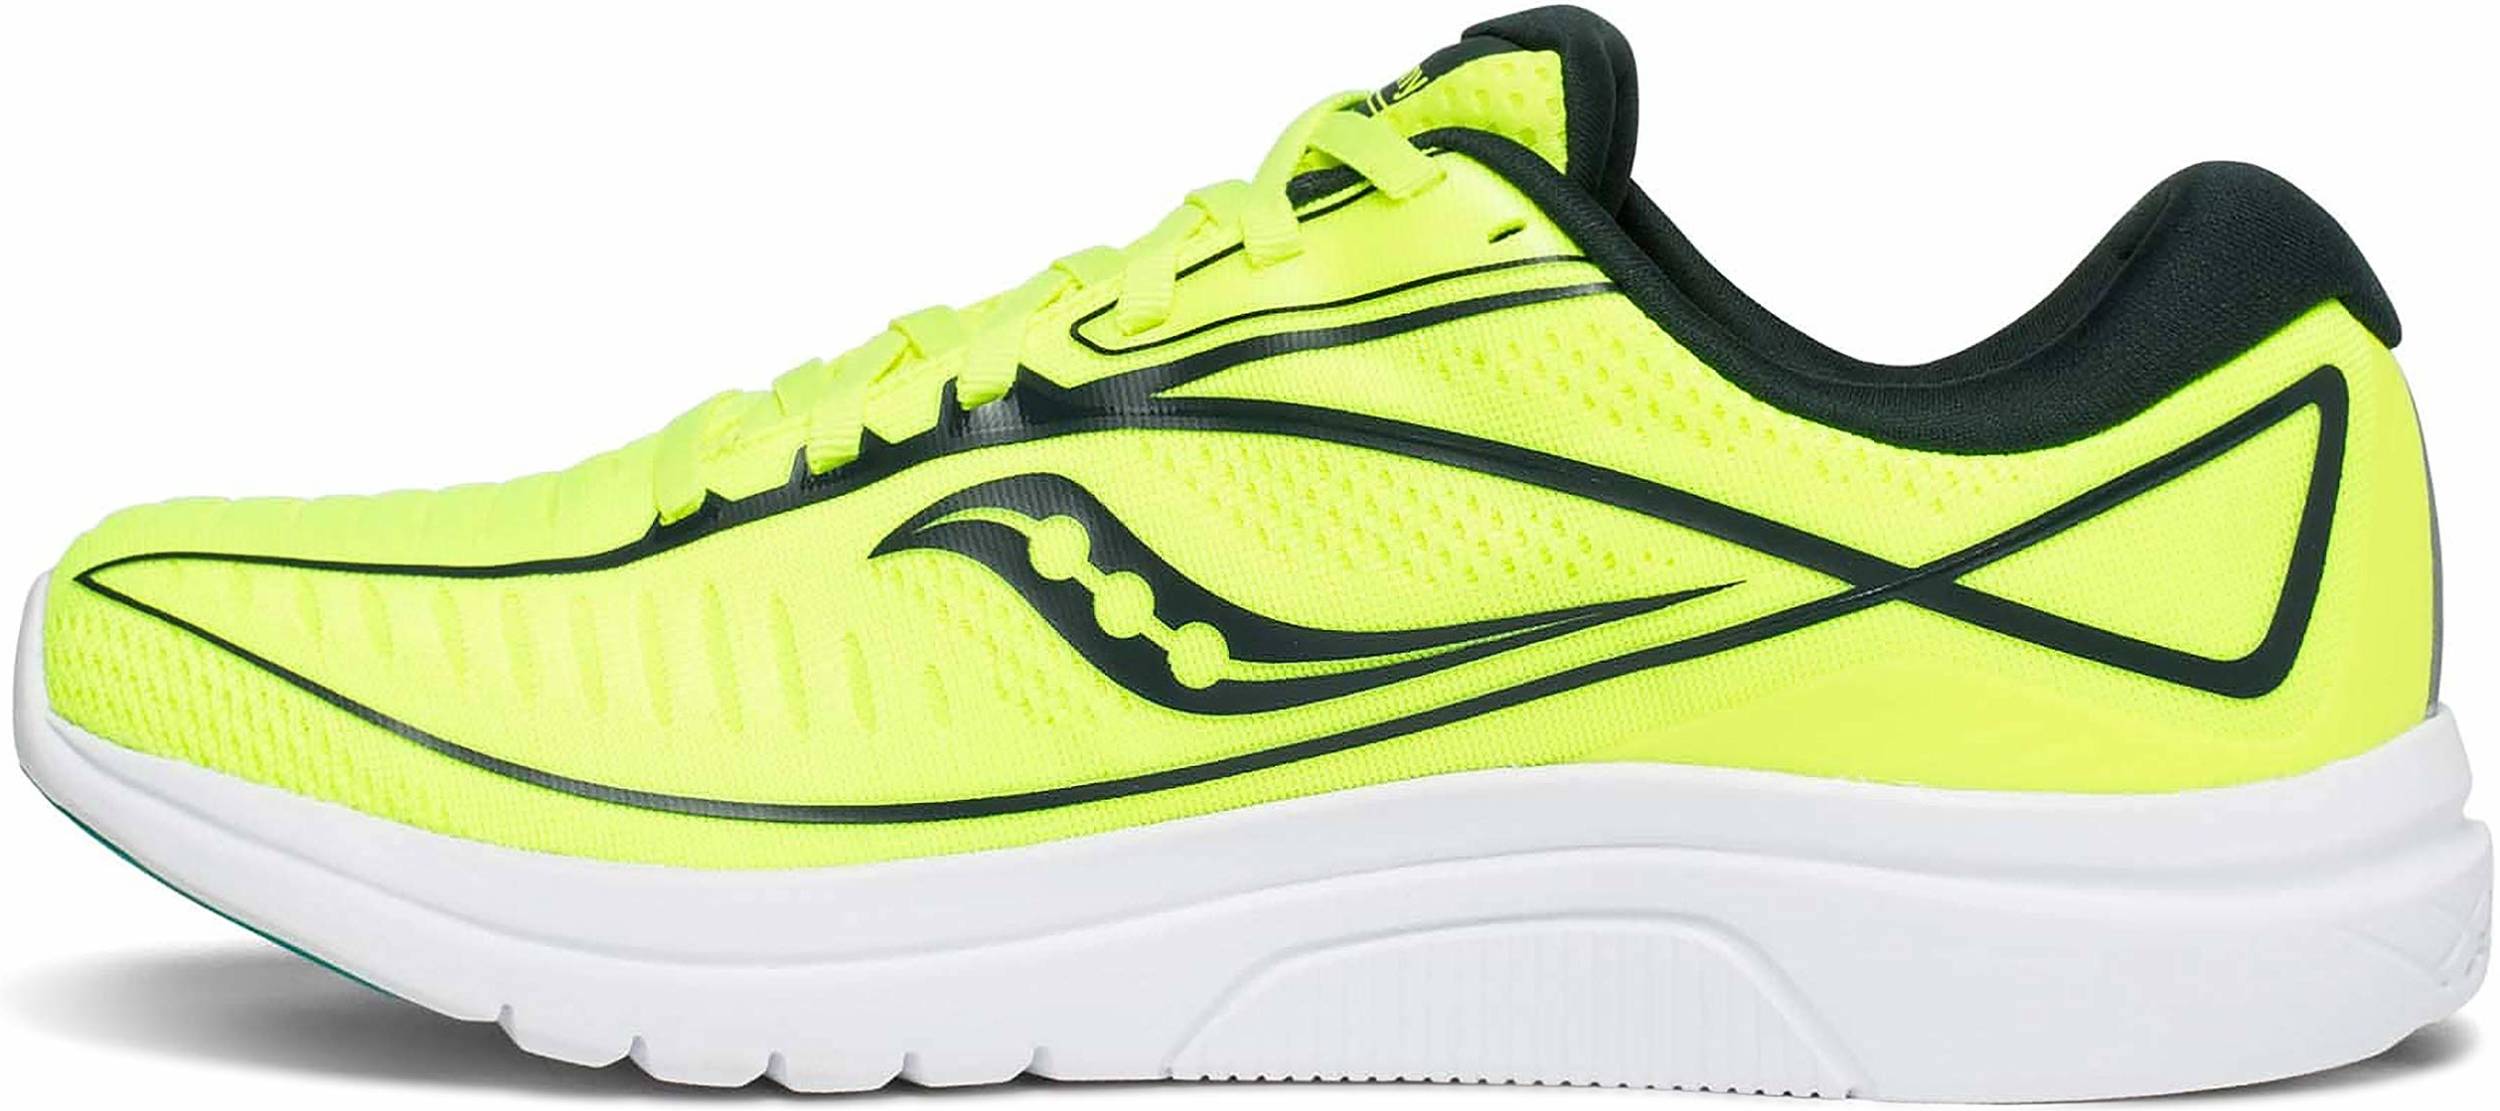 Only $80 + Review of Saucony Kinvara 10 